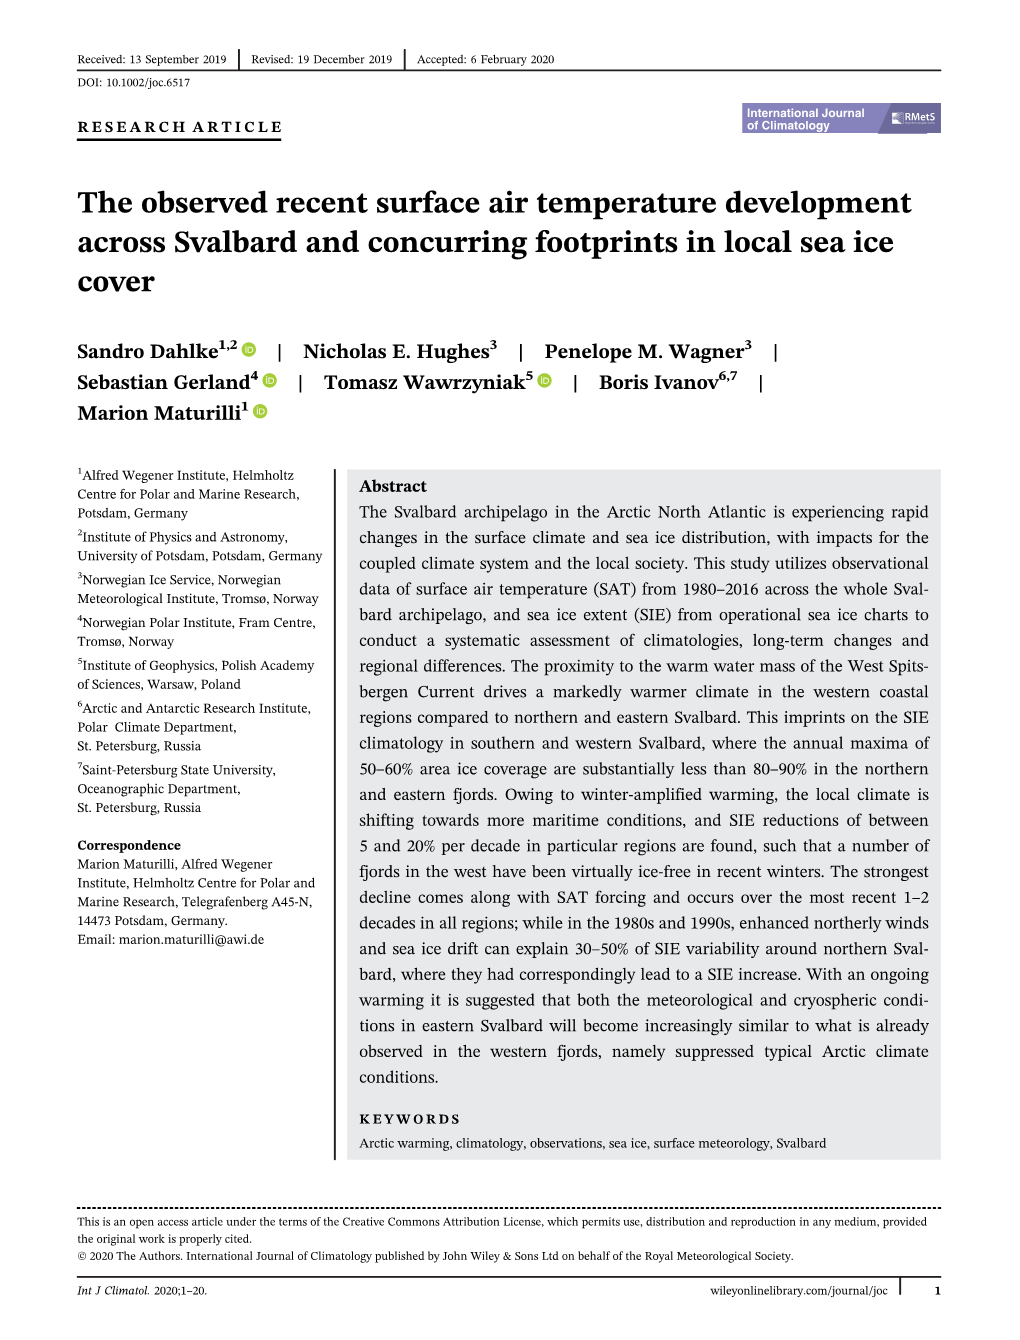 The Observed Recent Surface Air Temperature Development Across Svalbard and Concurring Footprints in Local Sea Ice Cover